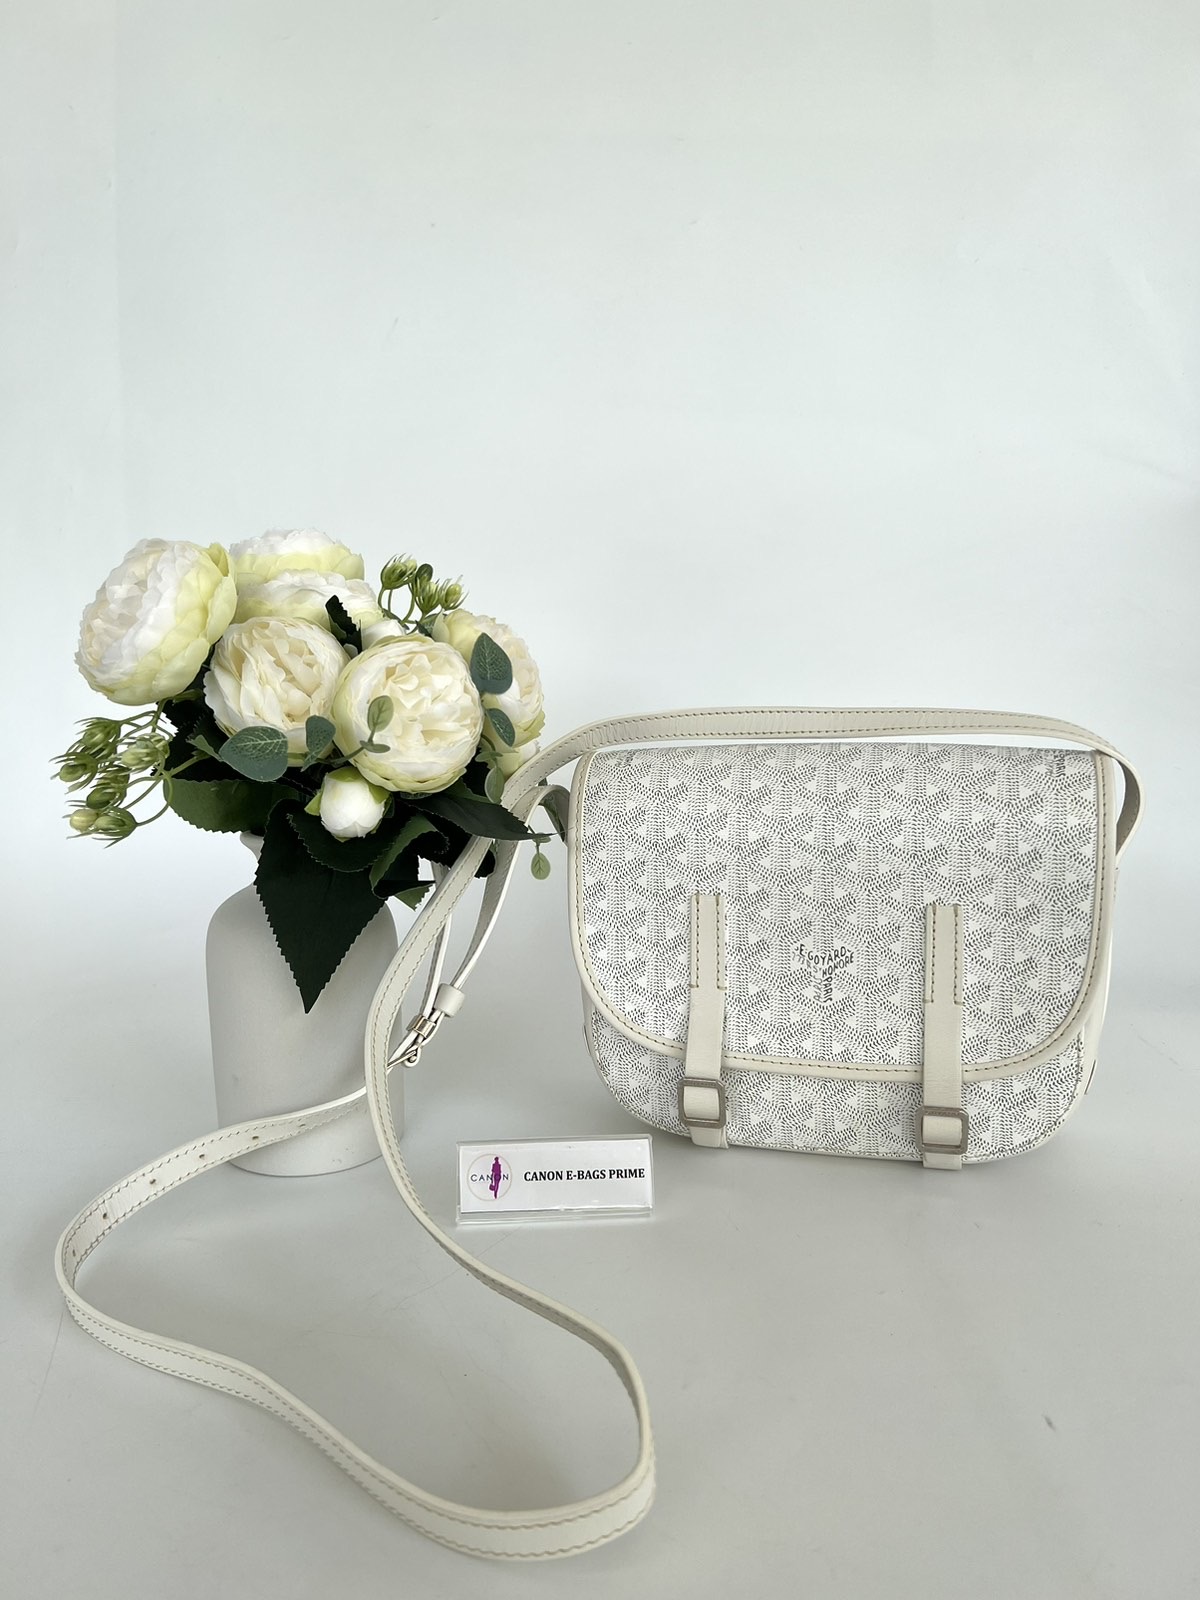 Goyard White Belvedere PM. Made in France. No inclusions